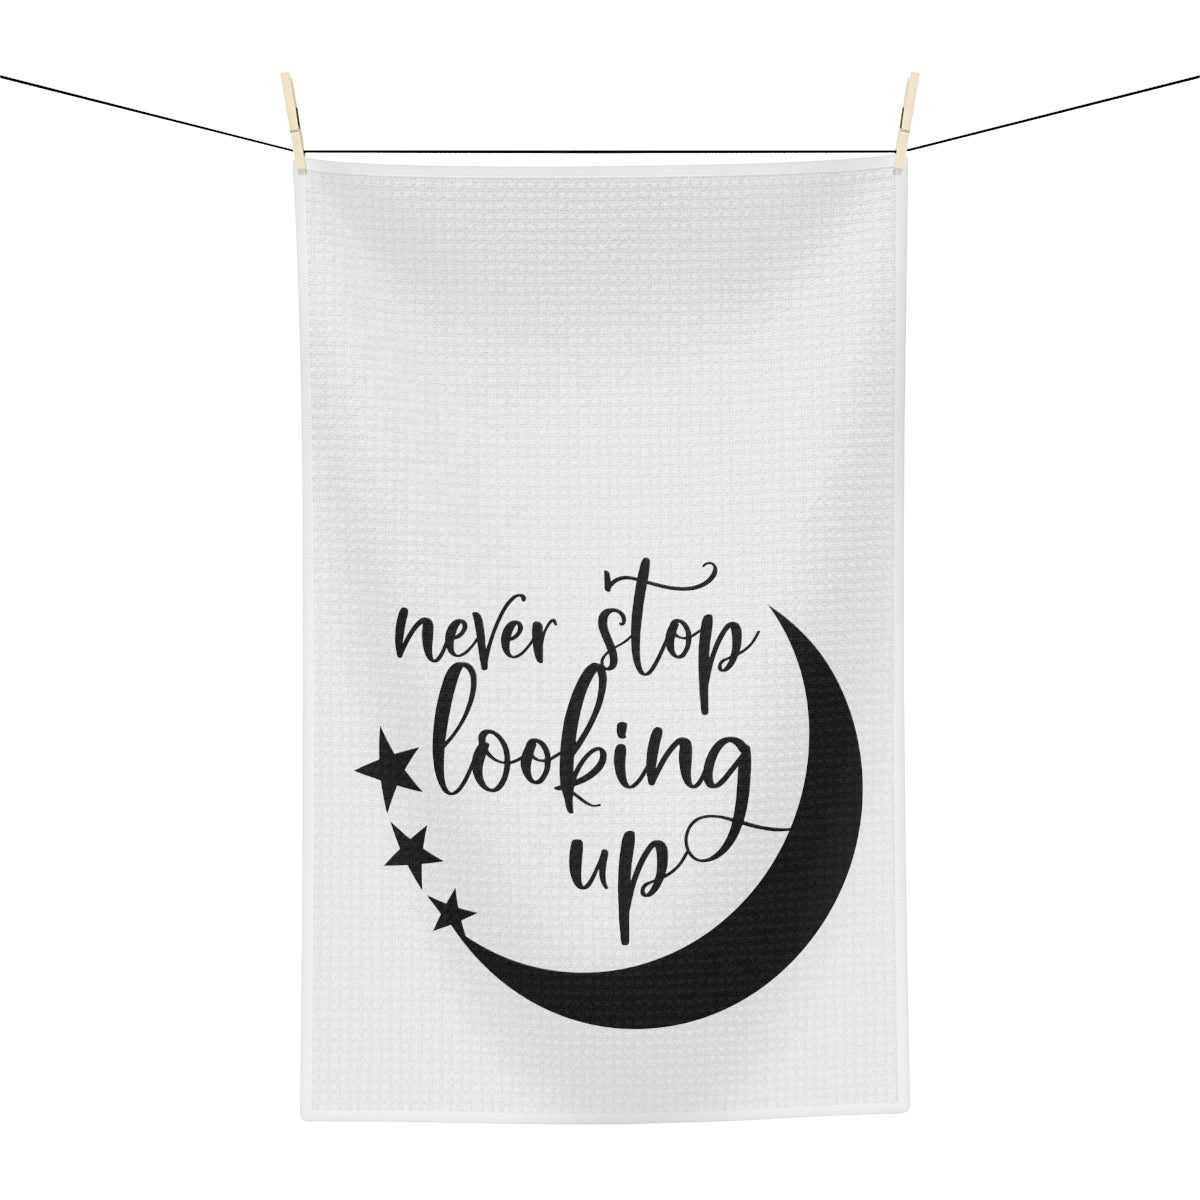 Never Stop Looking Up Tea Towel - Witchy Kitchens